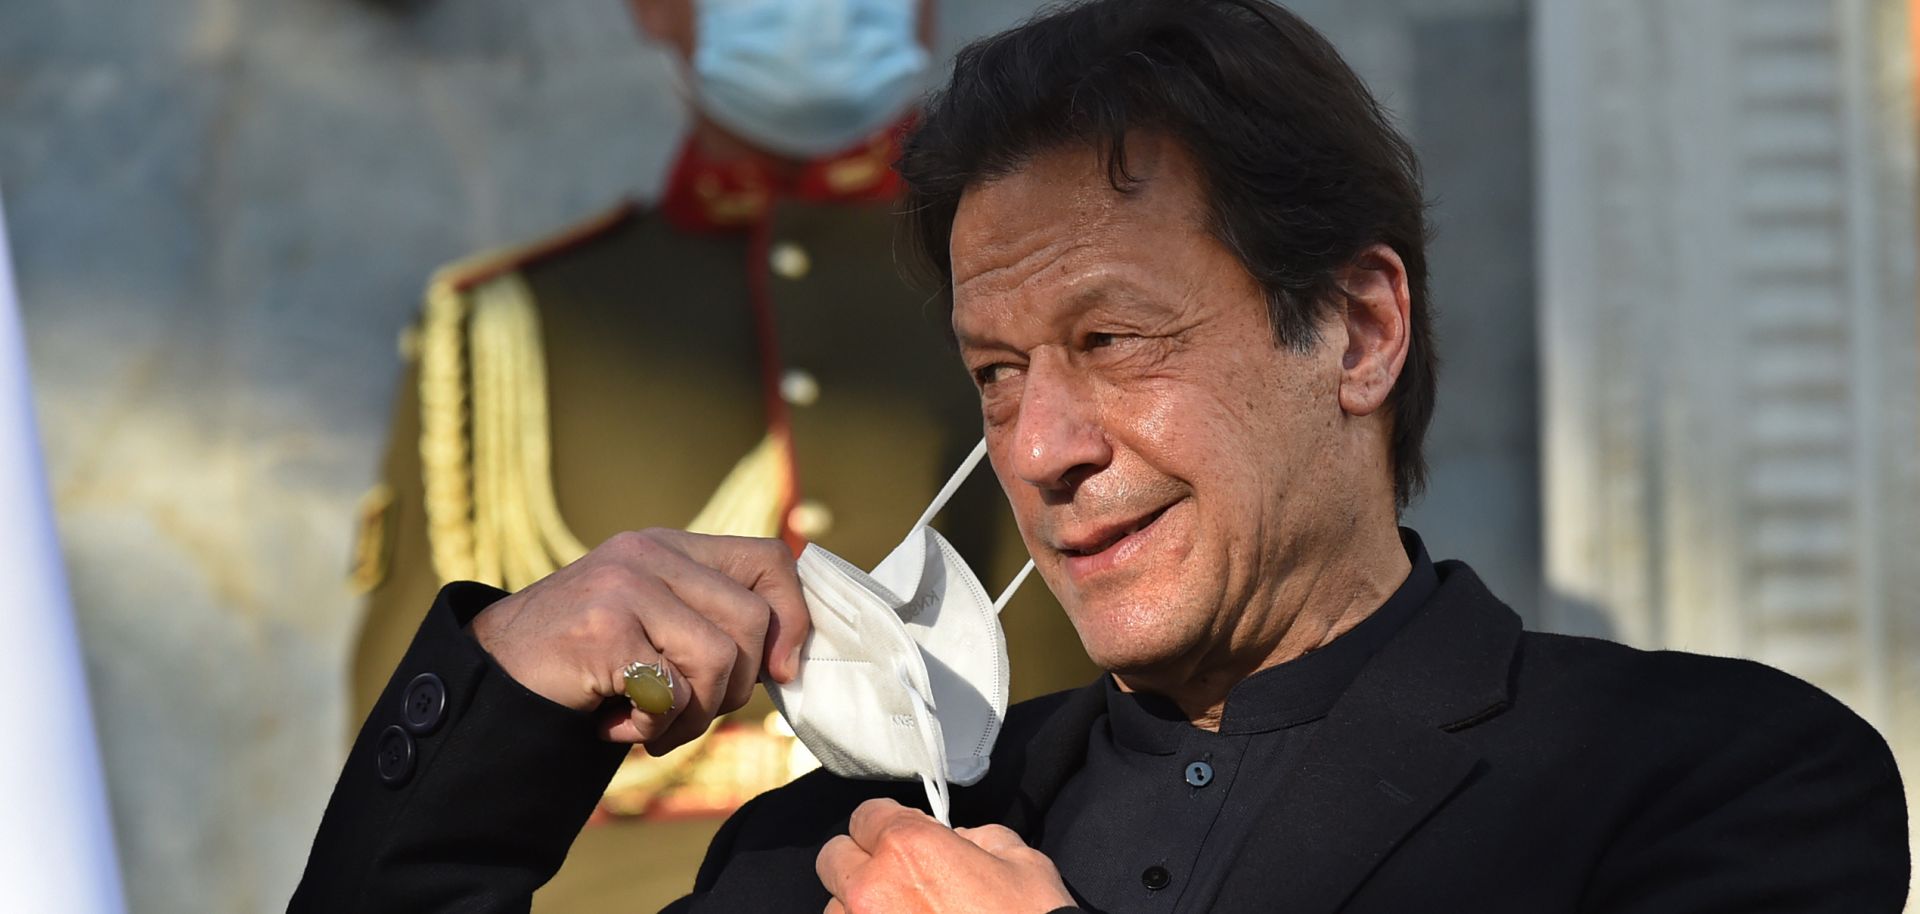 Pakistani Prime Minister Imran Khan removes his facemask during a press conference on Nov. 19, 2020.